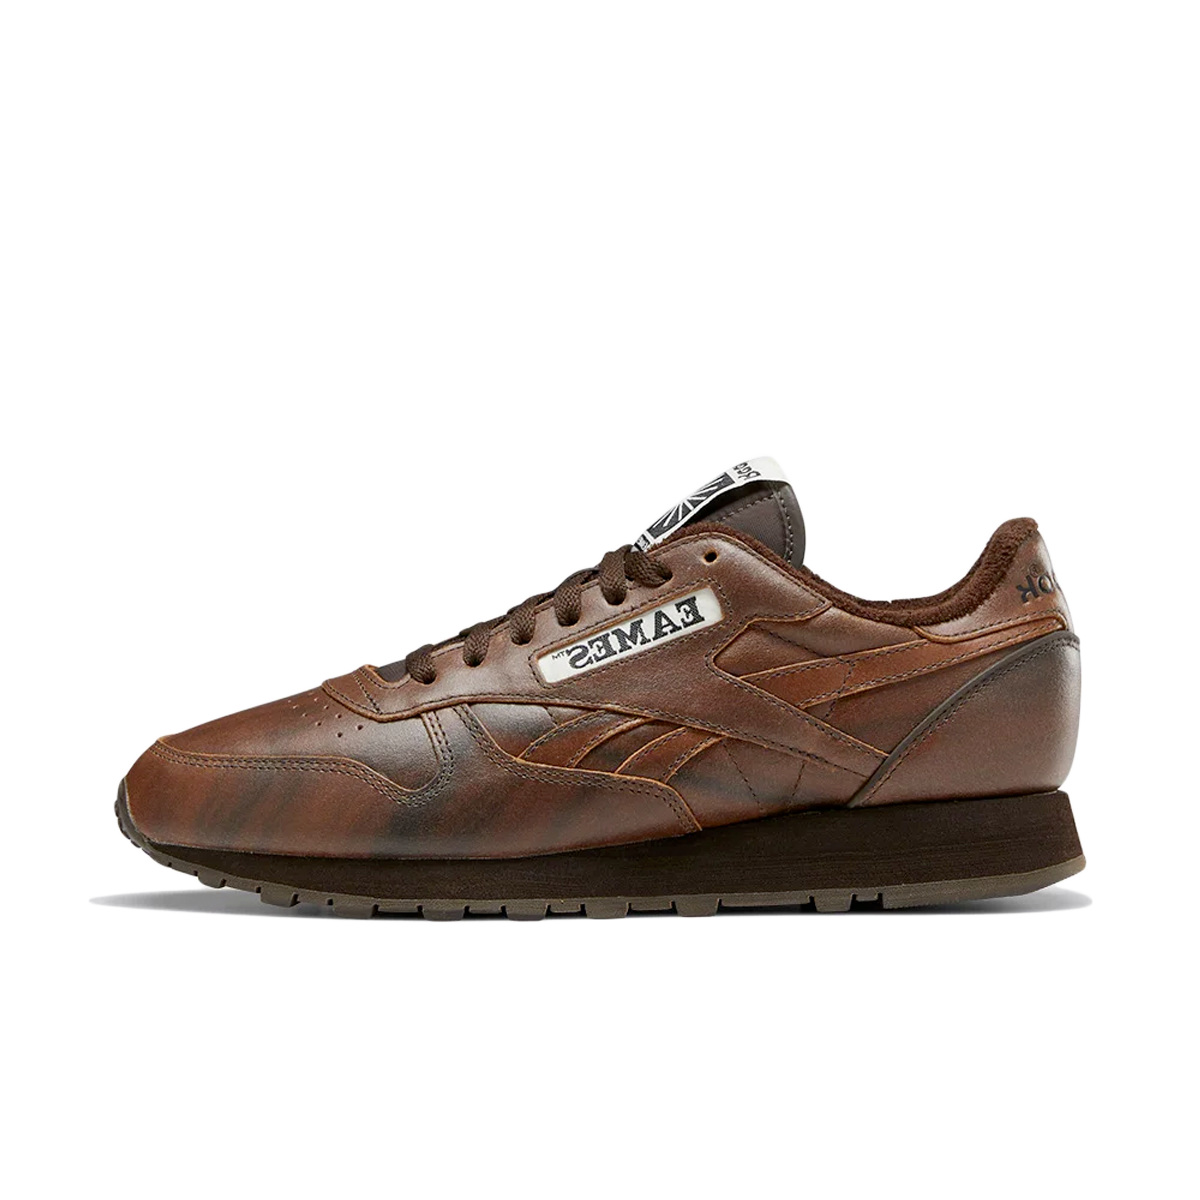 Eames x Reebok Classic Leather 'Brown'